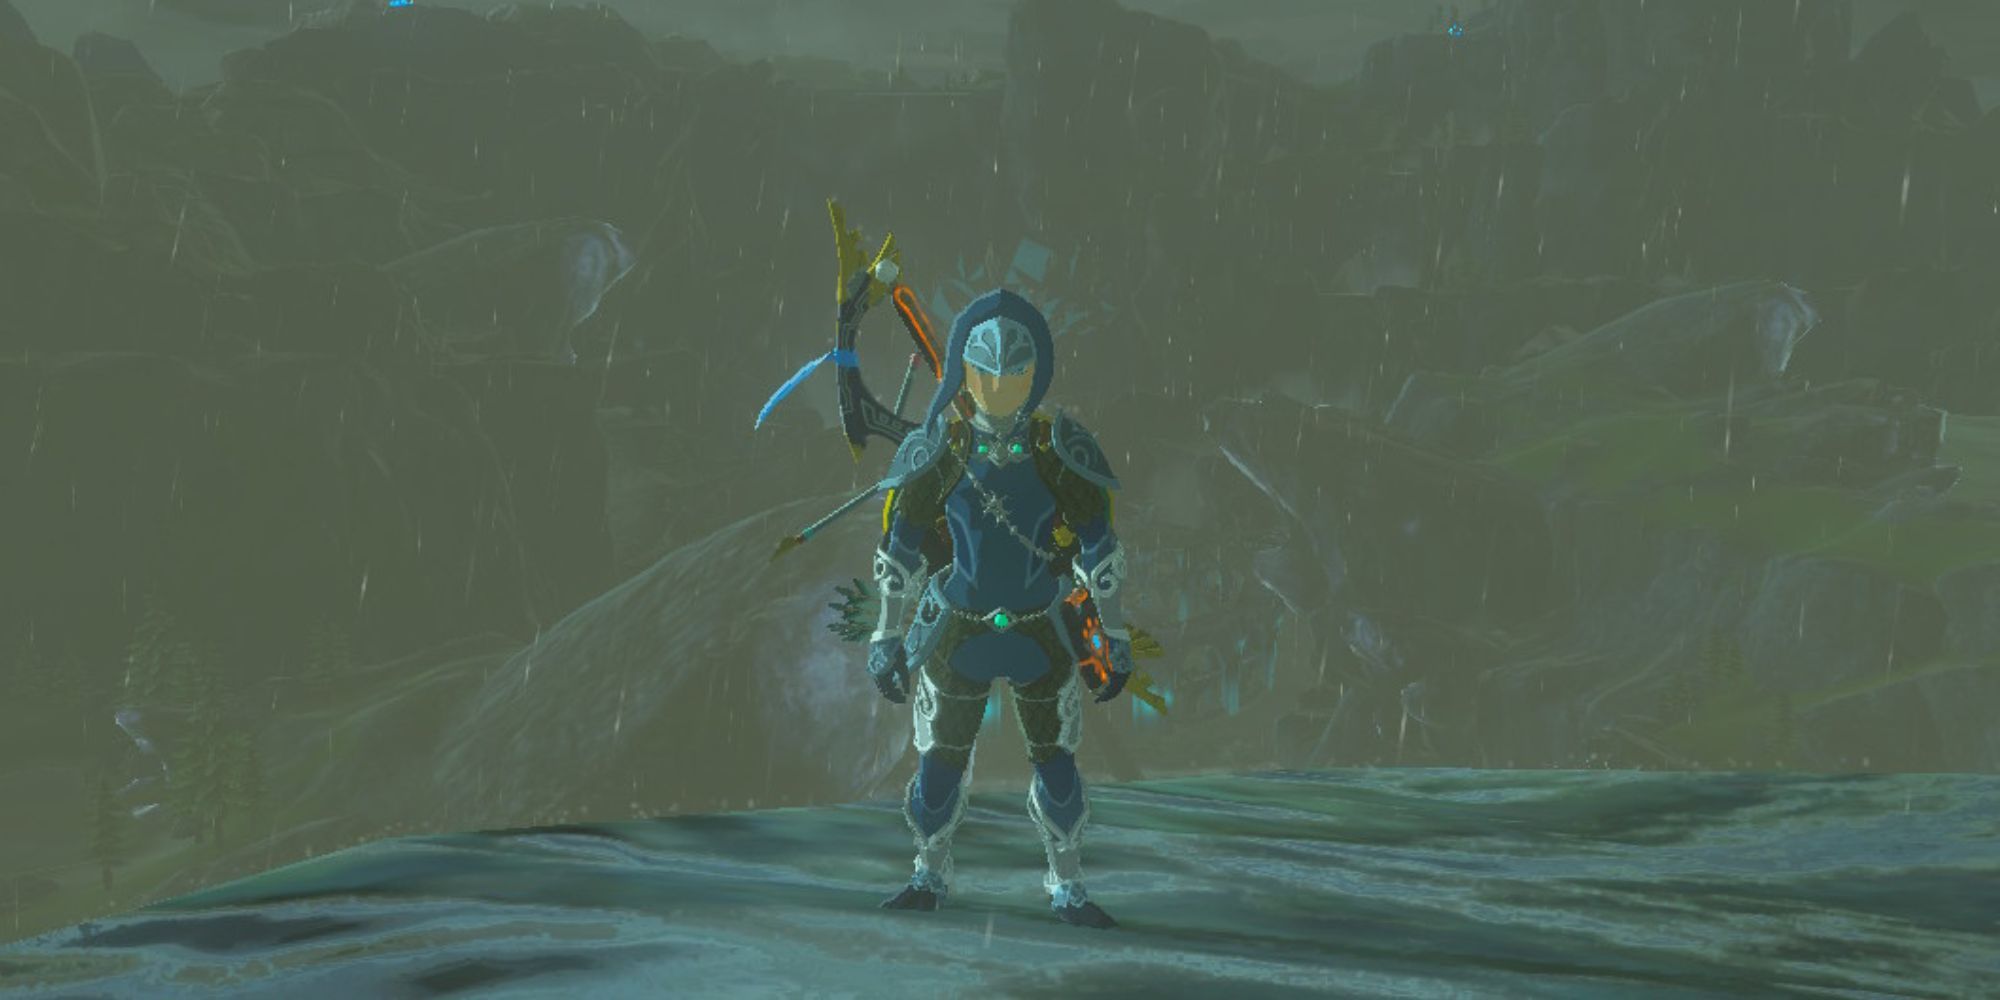 Link stands on the edge of a cliff while wearing the Zora Set